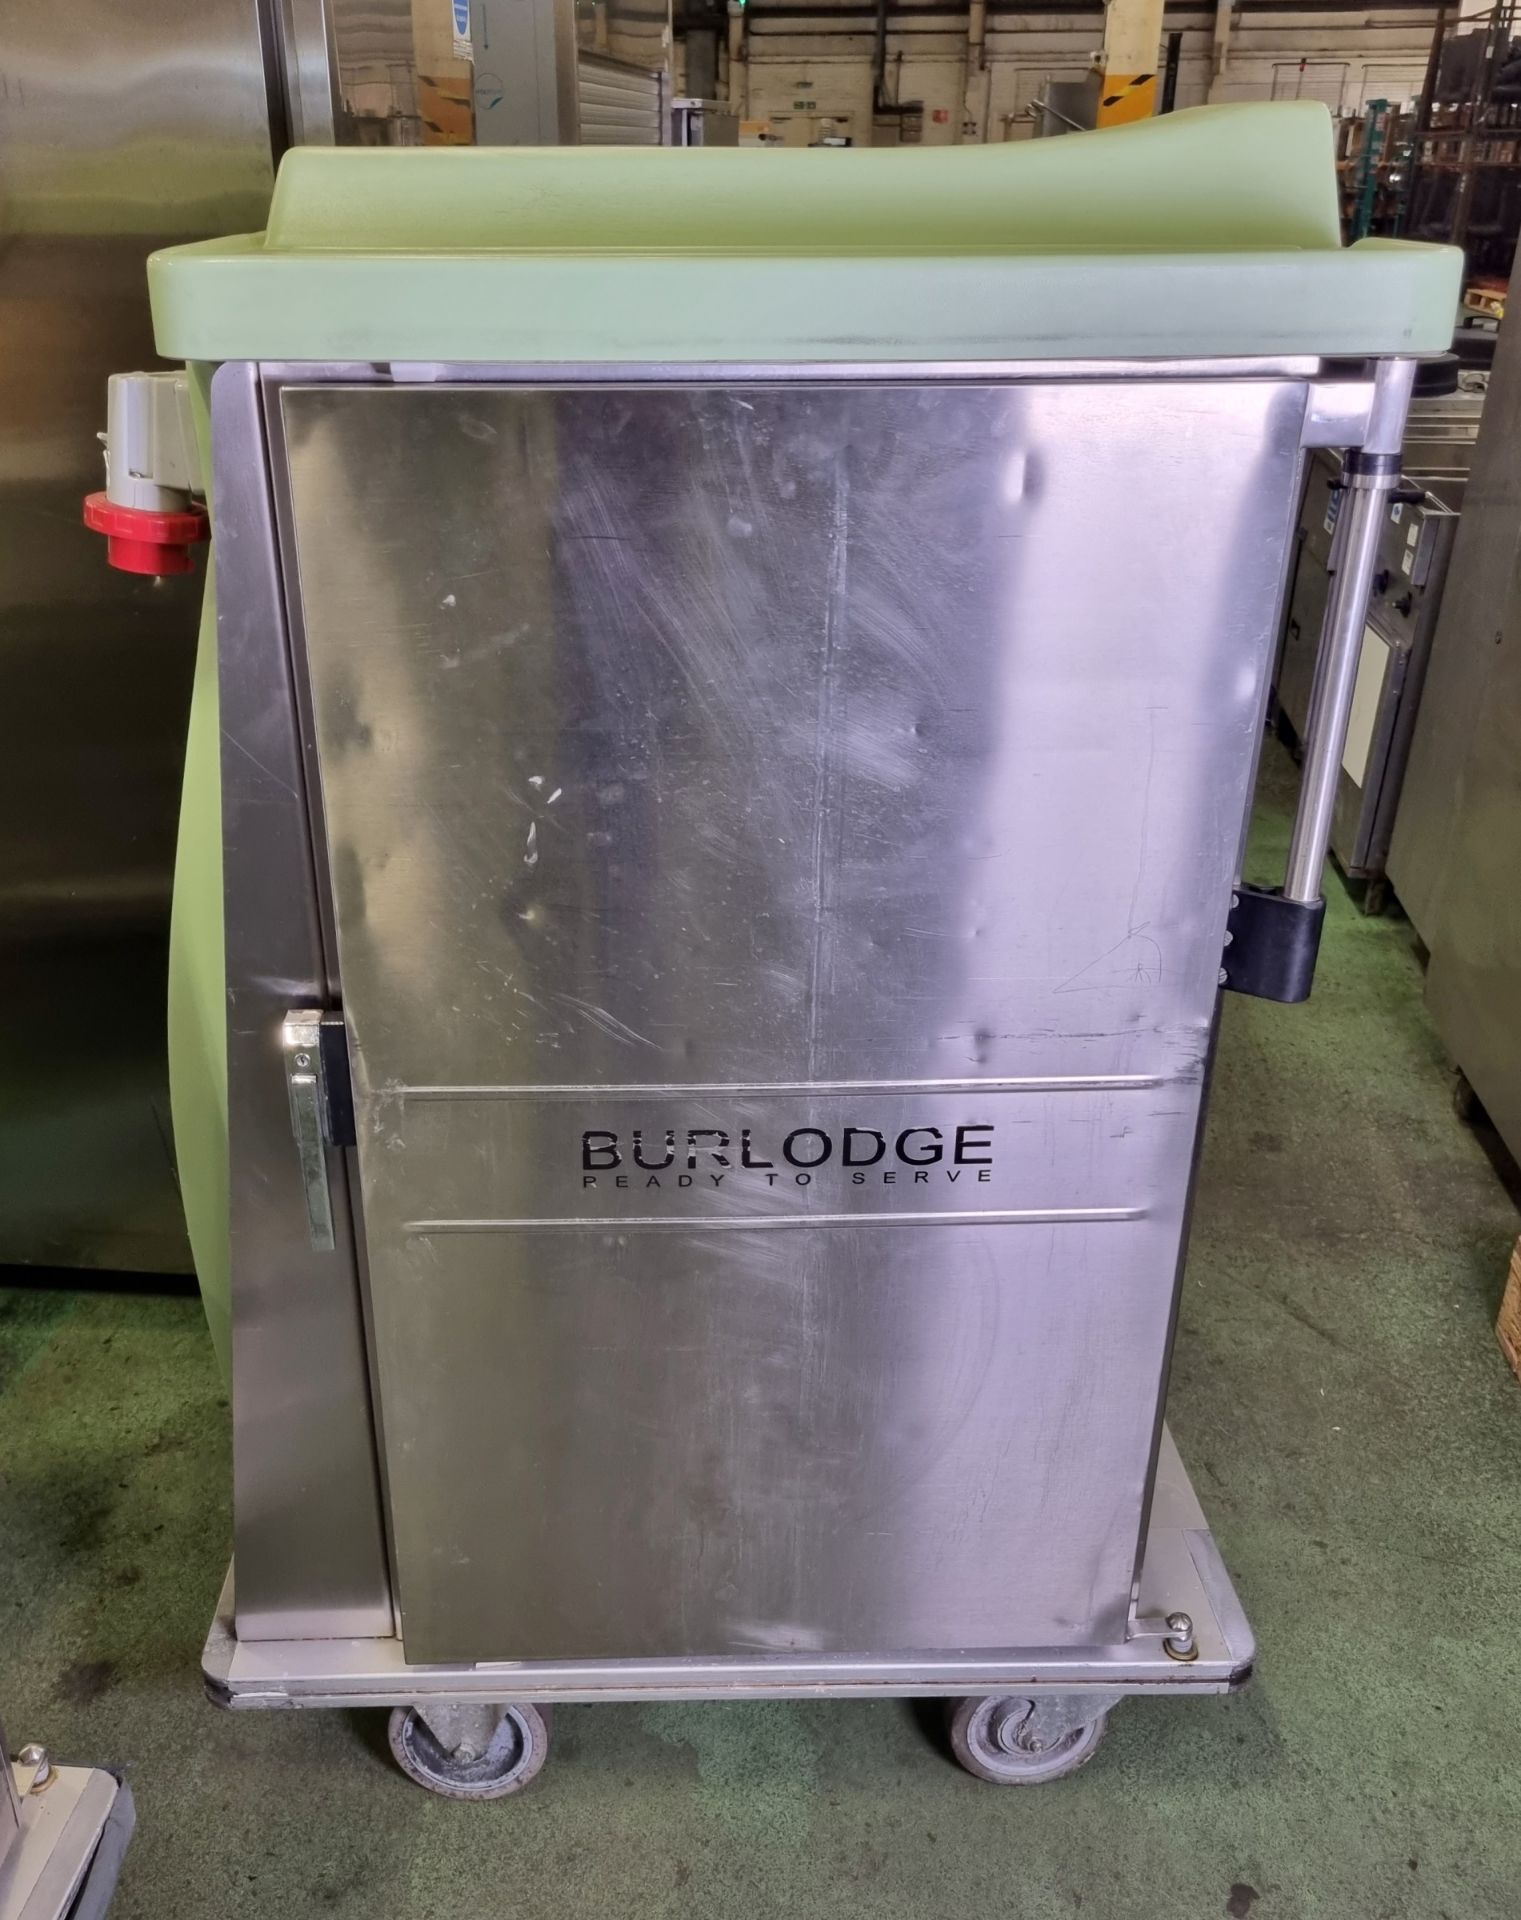 Burlodge RTS hot and cold tray delivery trolley - opens boths sides - W 800 x D 1100 x H 1500mm - Bild 4 aus 5